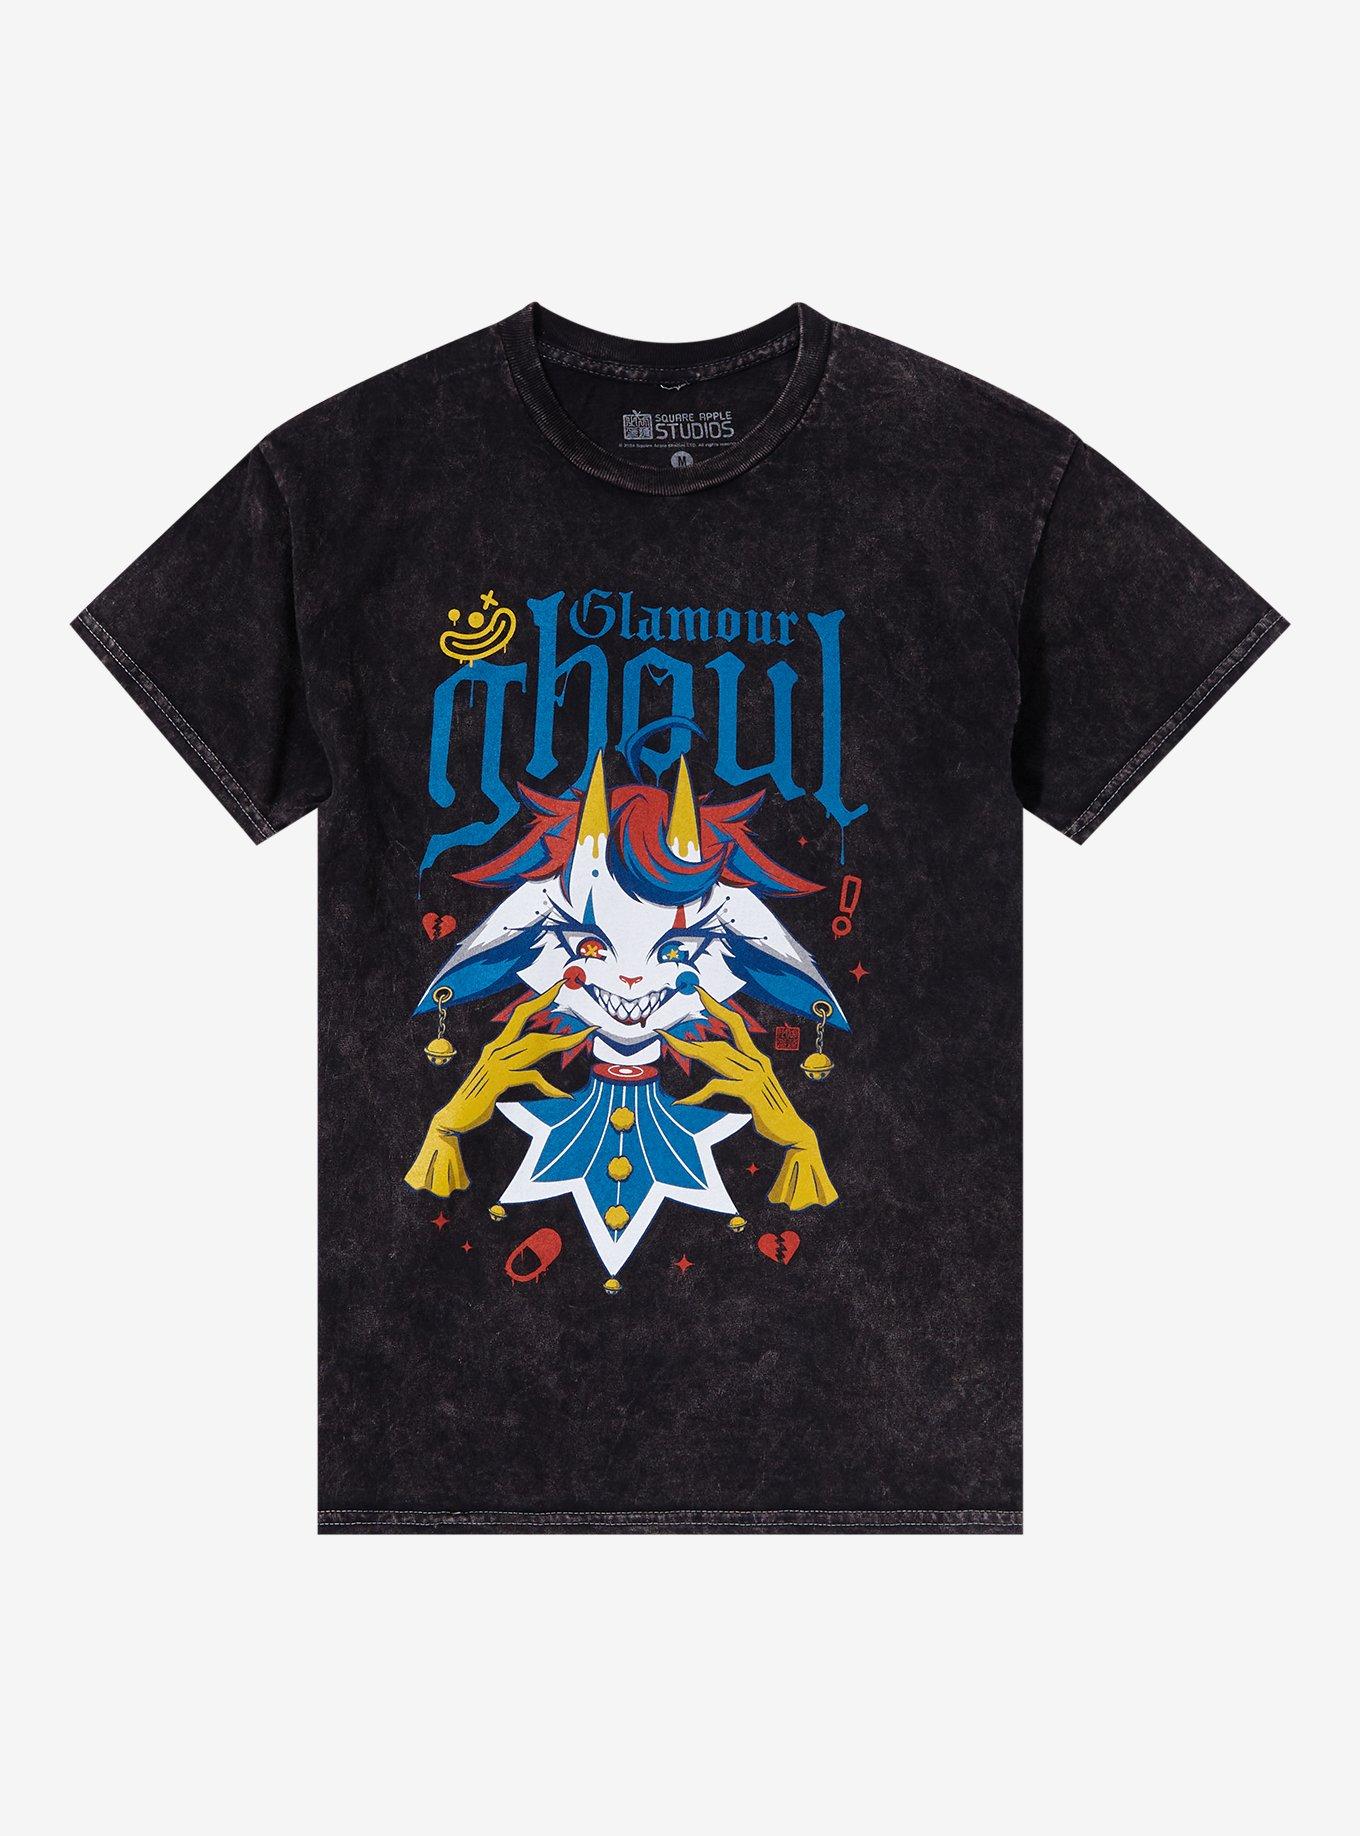 Glamour Ghoul Dark Wash T-Shirt By Square Apple Studios, MULTI, hi-res